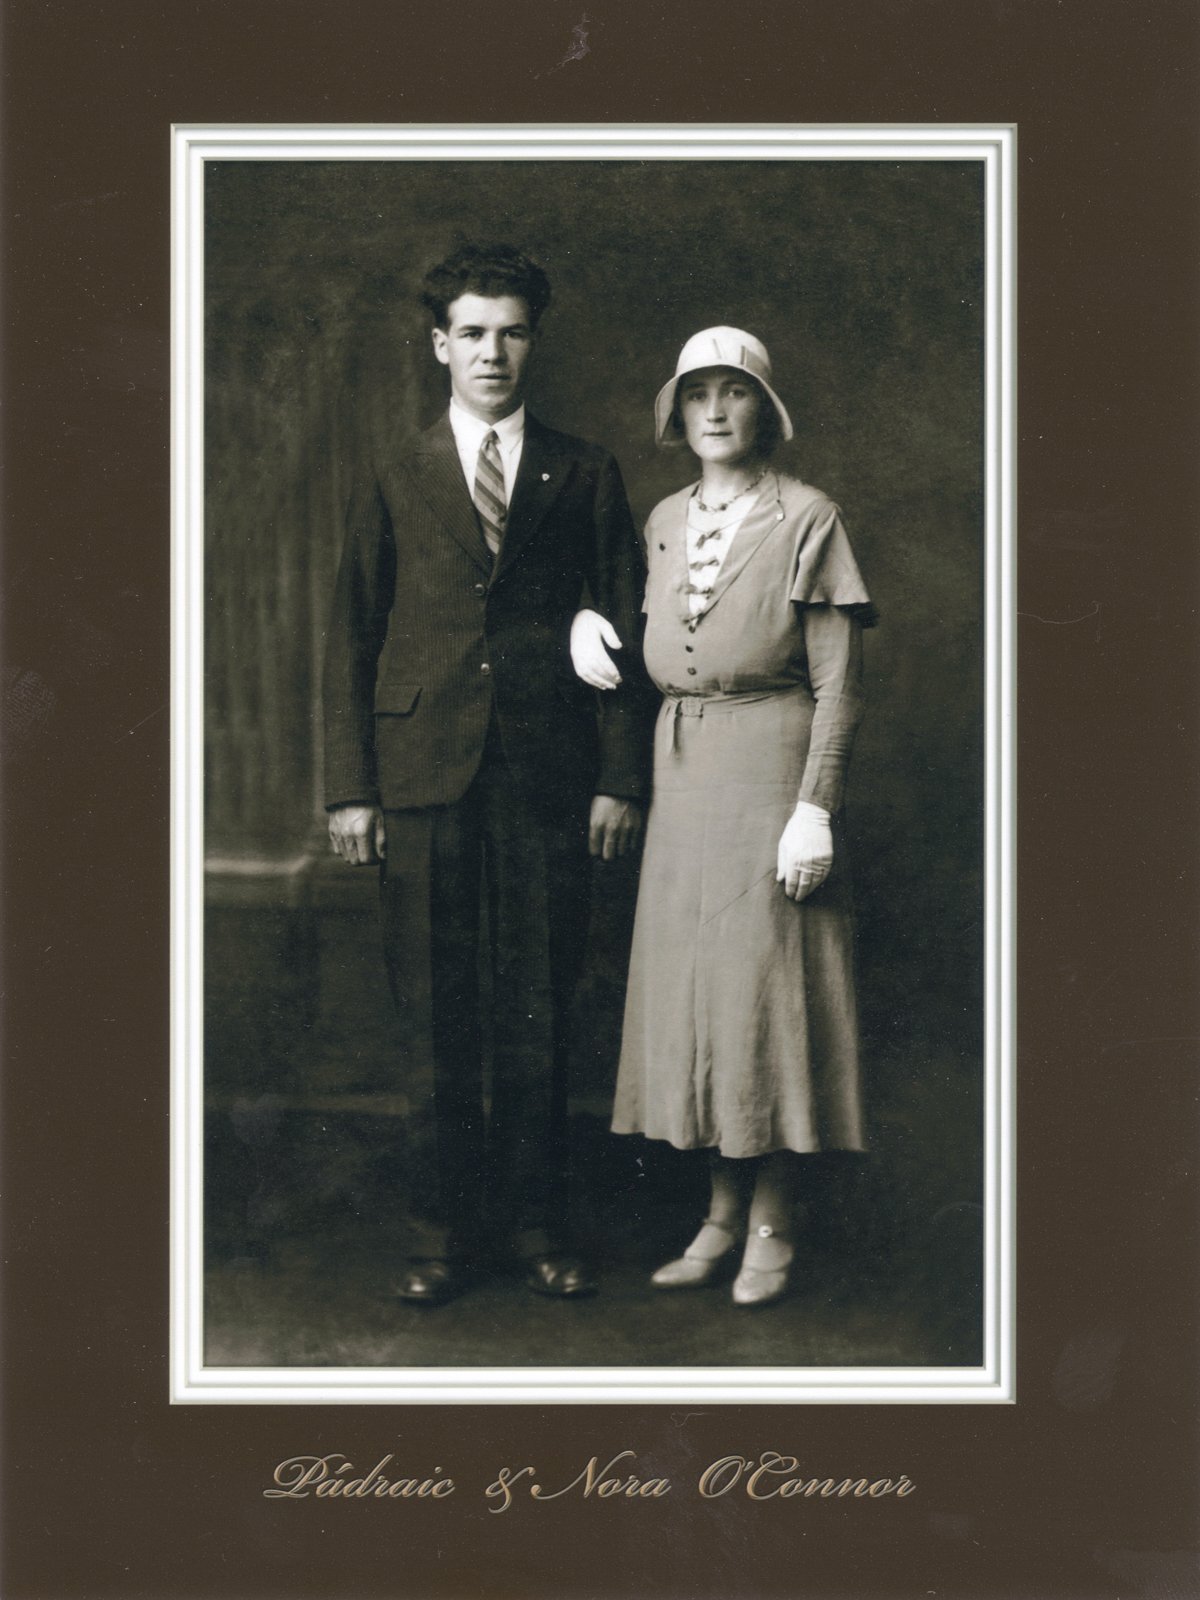 James Slowey and Maria Rudden, grandparents of contributors, on their wedding day.